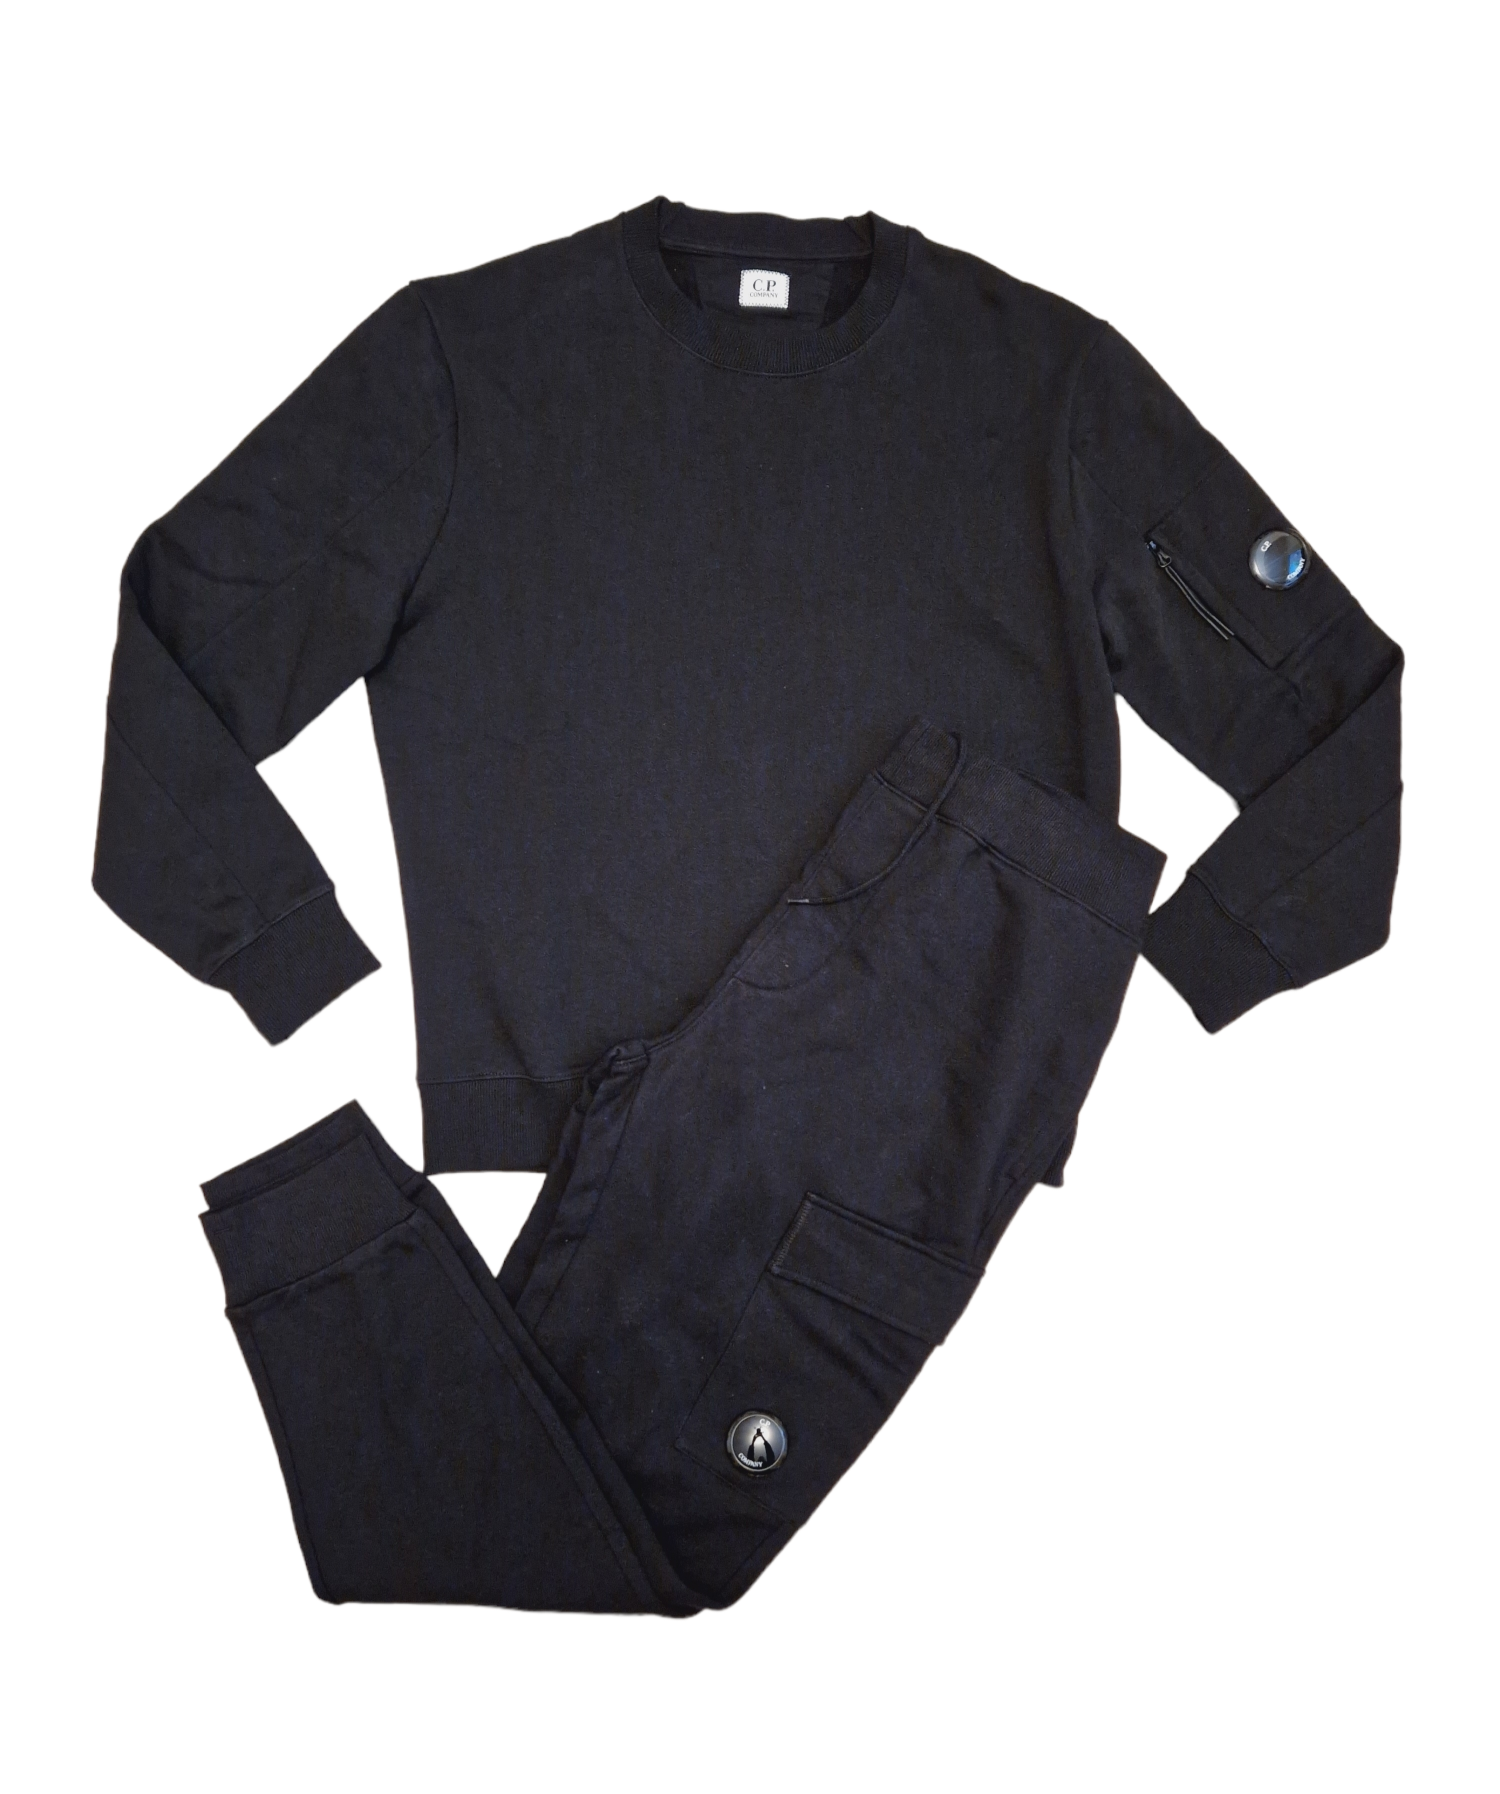 CP Company Full Tracksuit Black (Please Read)